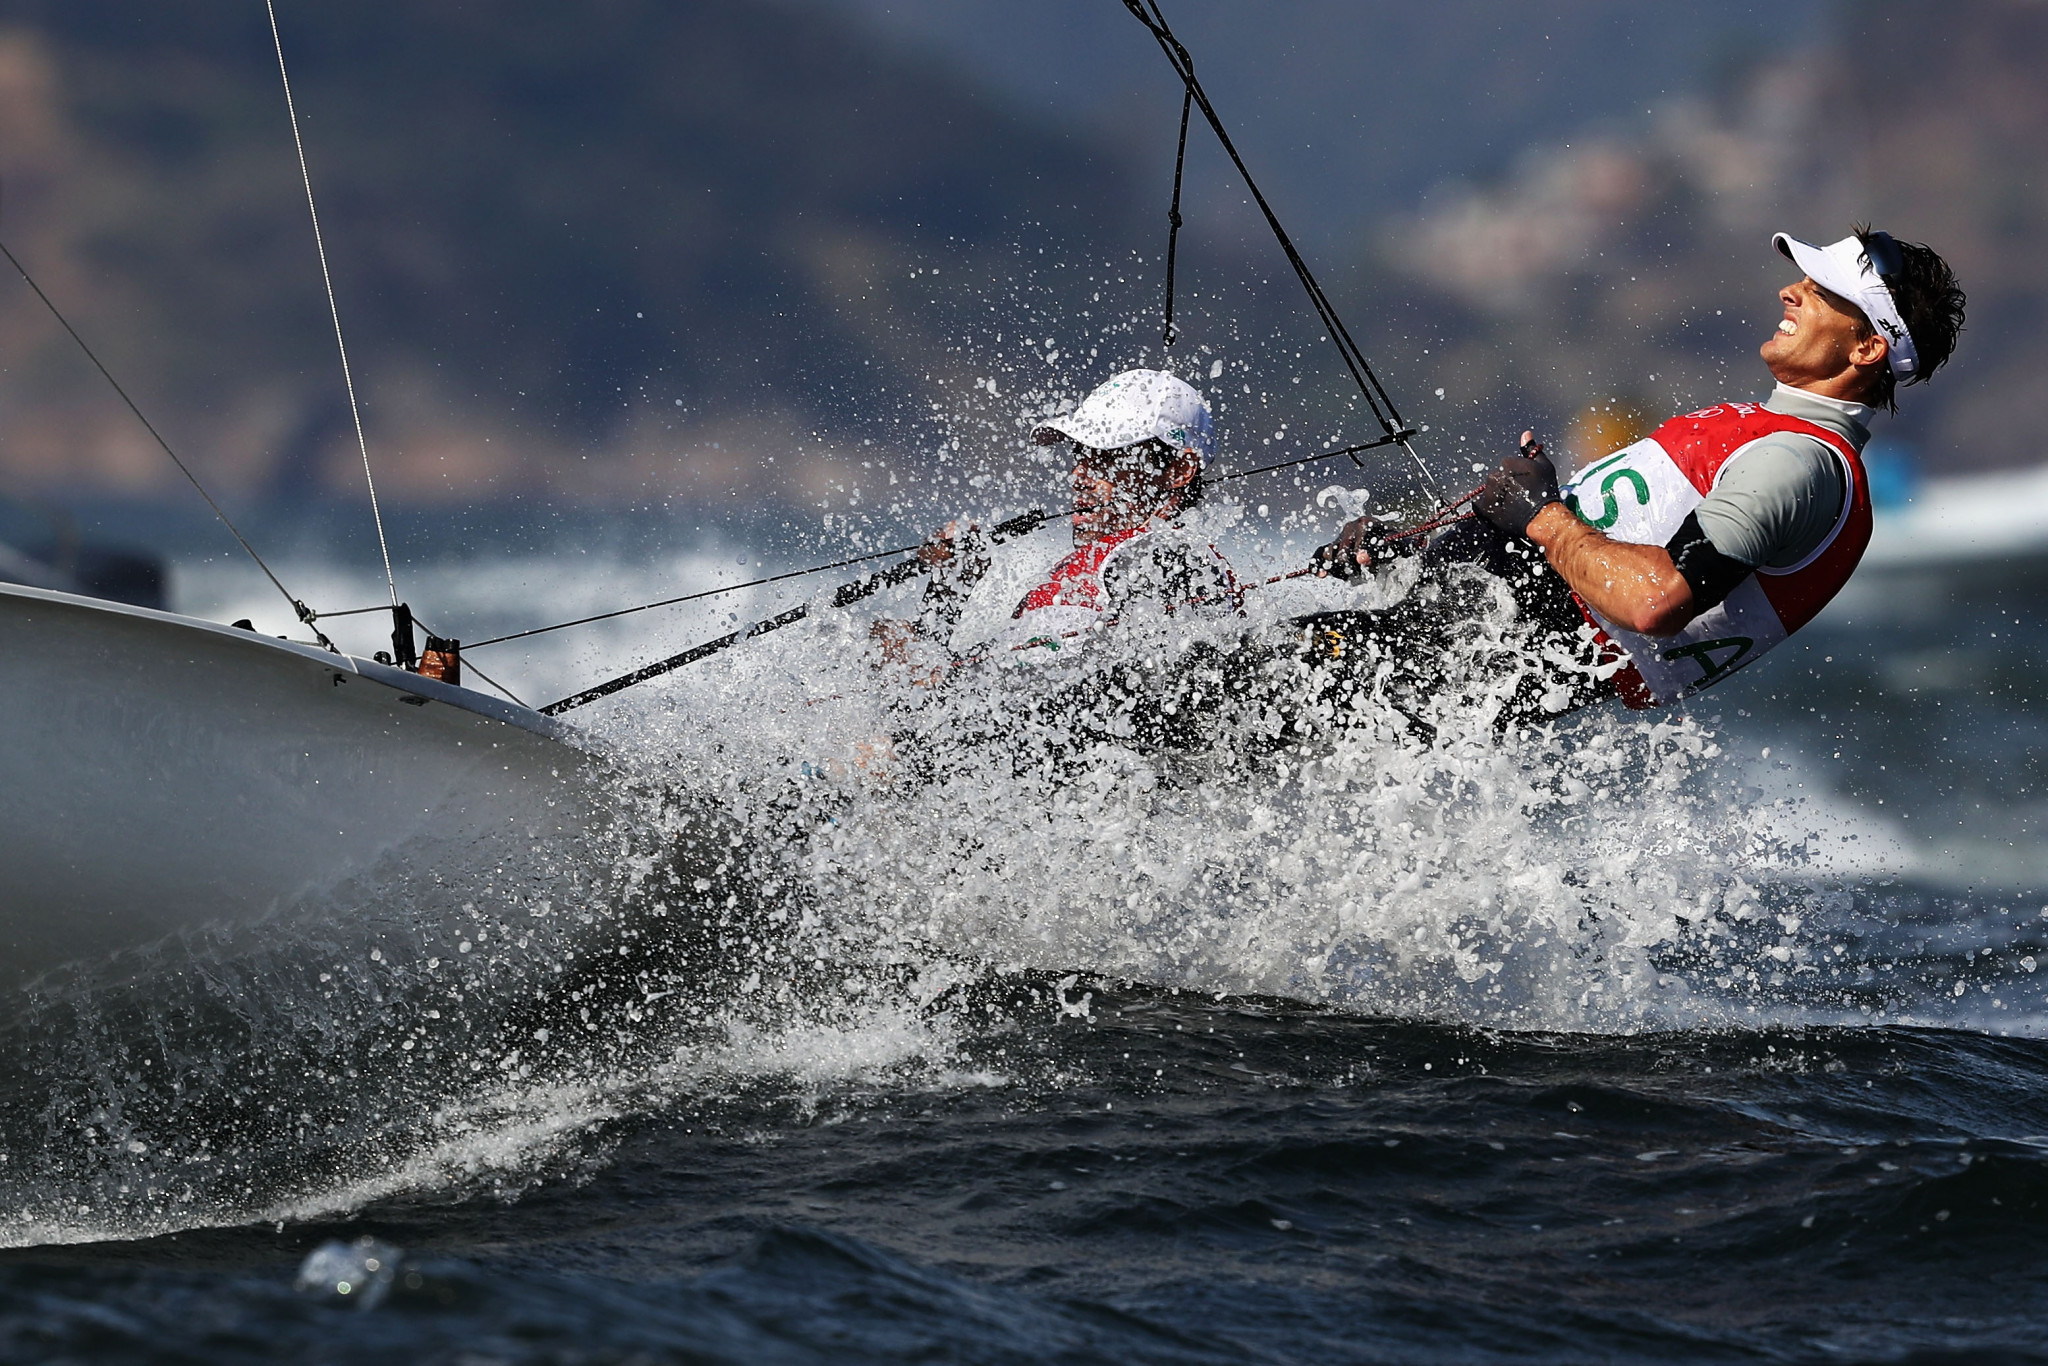 Australia’s Mathew Belcher and Will Ryan top the open standings following the first day of competition at the 470 European Sailing Championship on Marina degli Aregai in Italy ©Getty Images